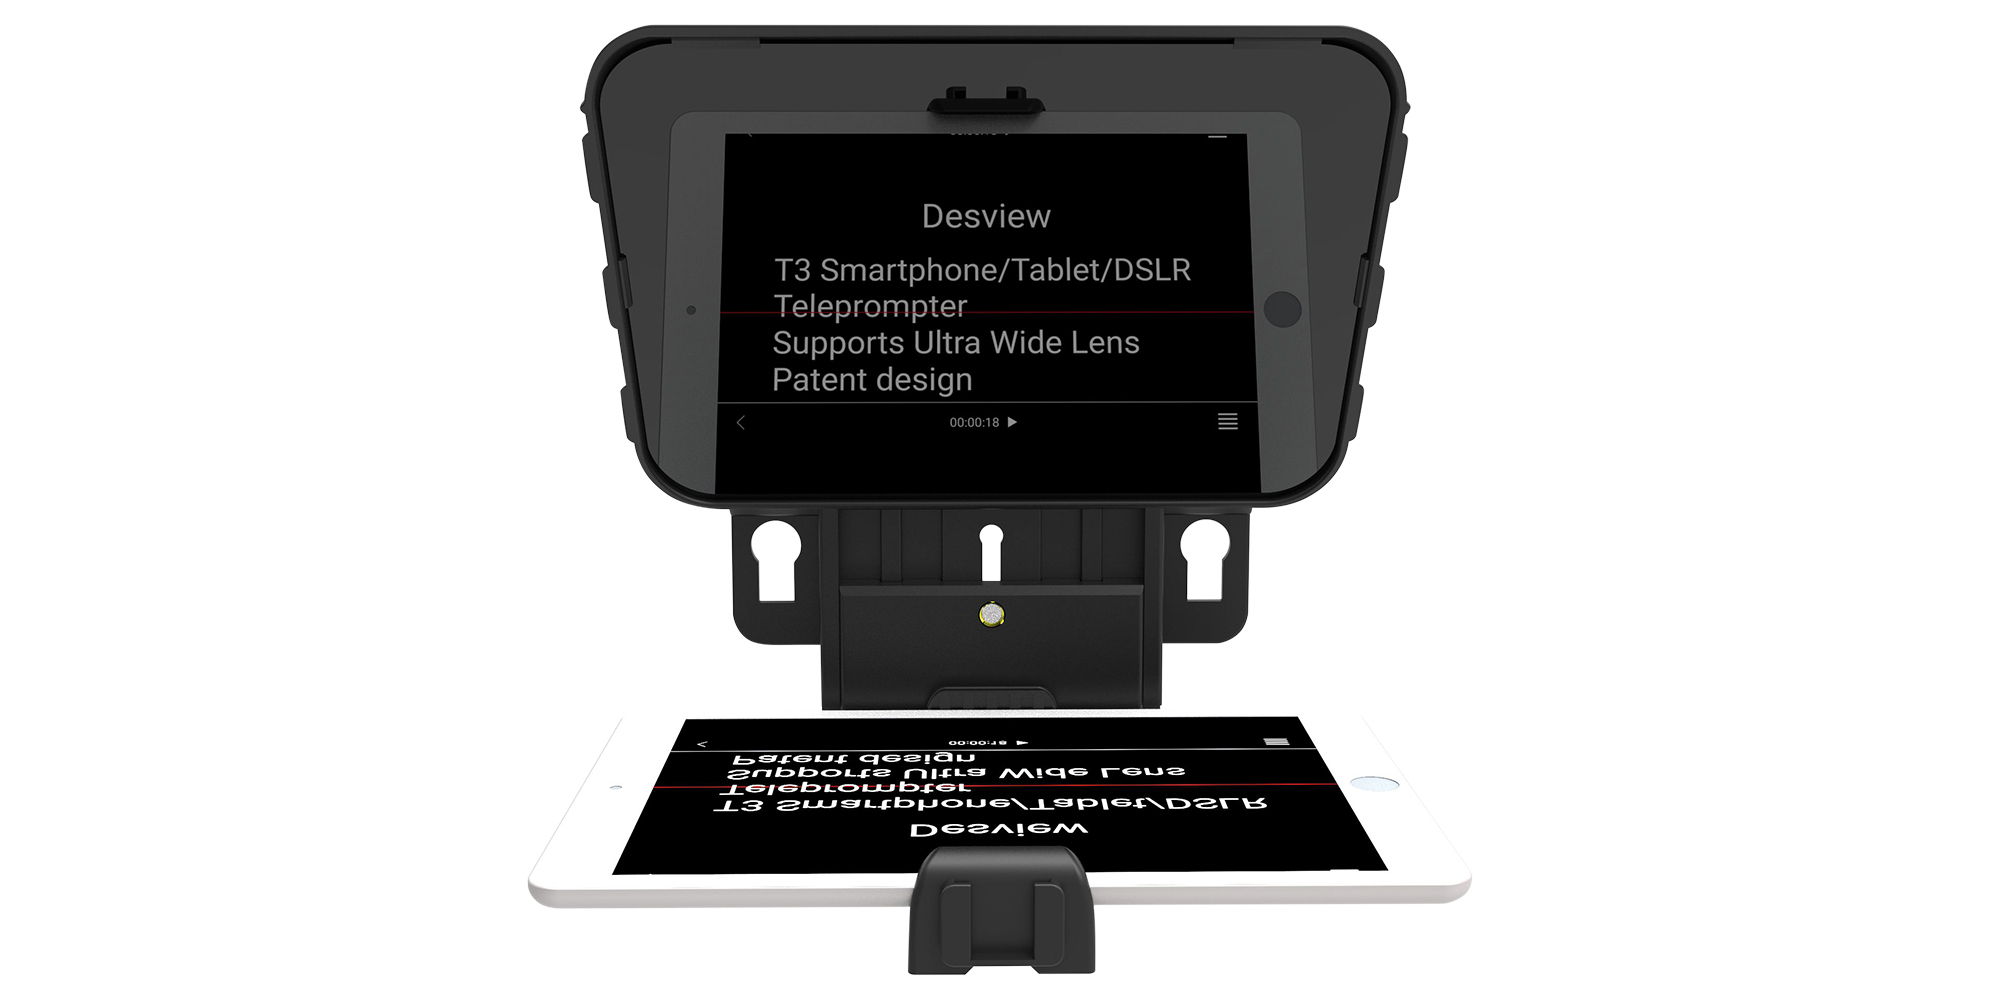 Desview T3 Teleprompter - No more repeating shots!